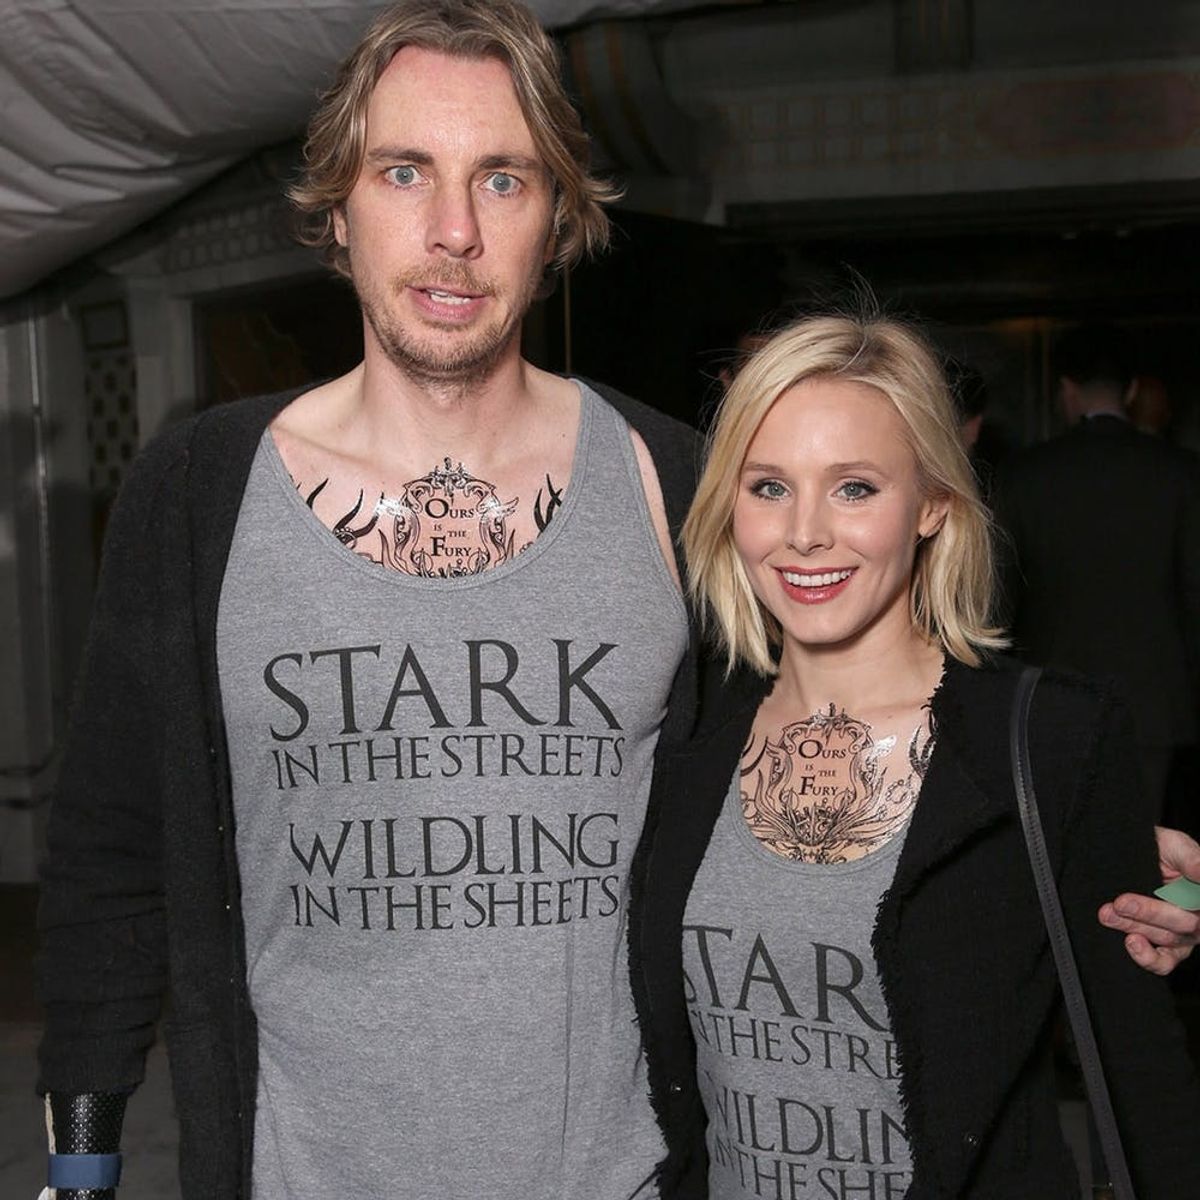 Kristen Bell and Dax Shepard Crashed the GOT Premiere in the Coolest Matching Outfits